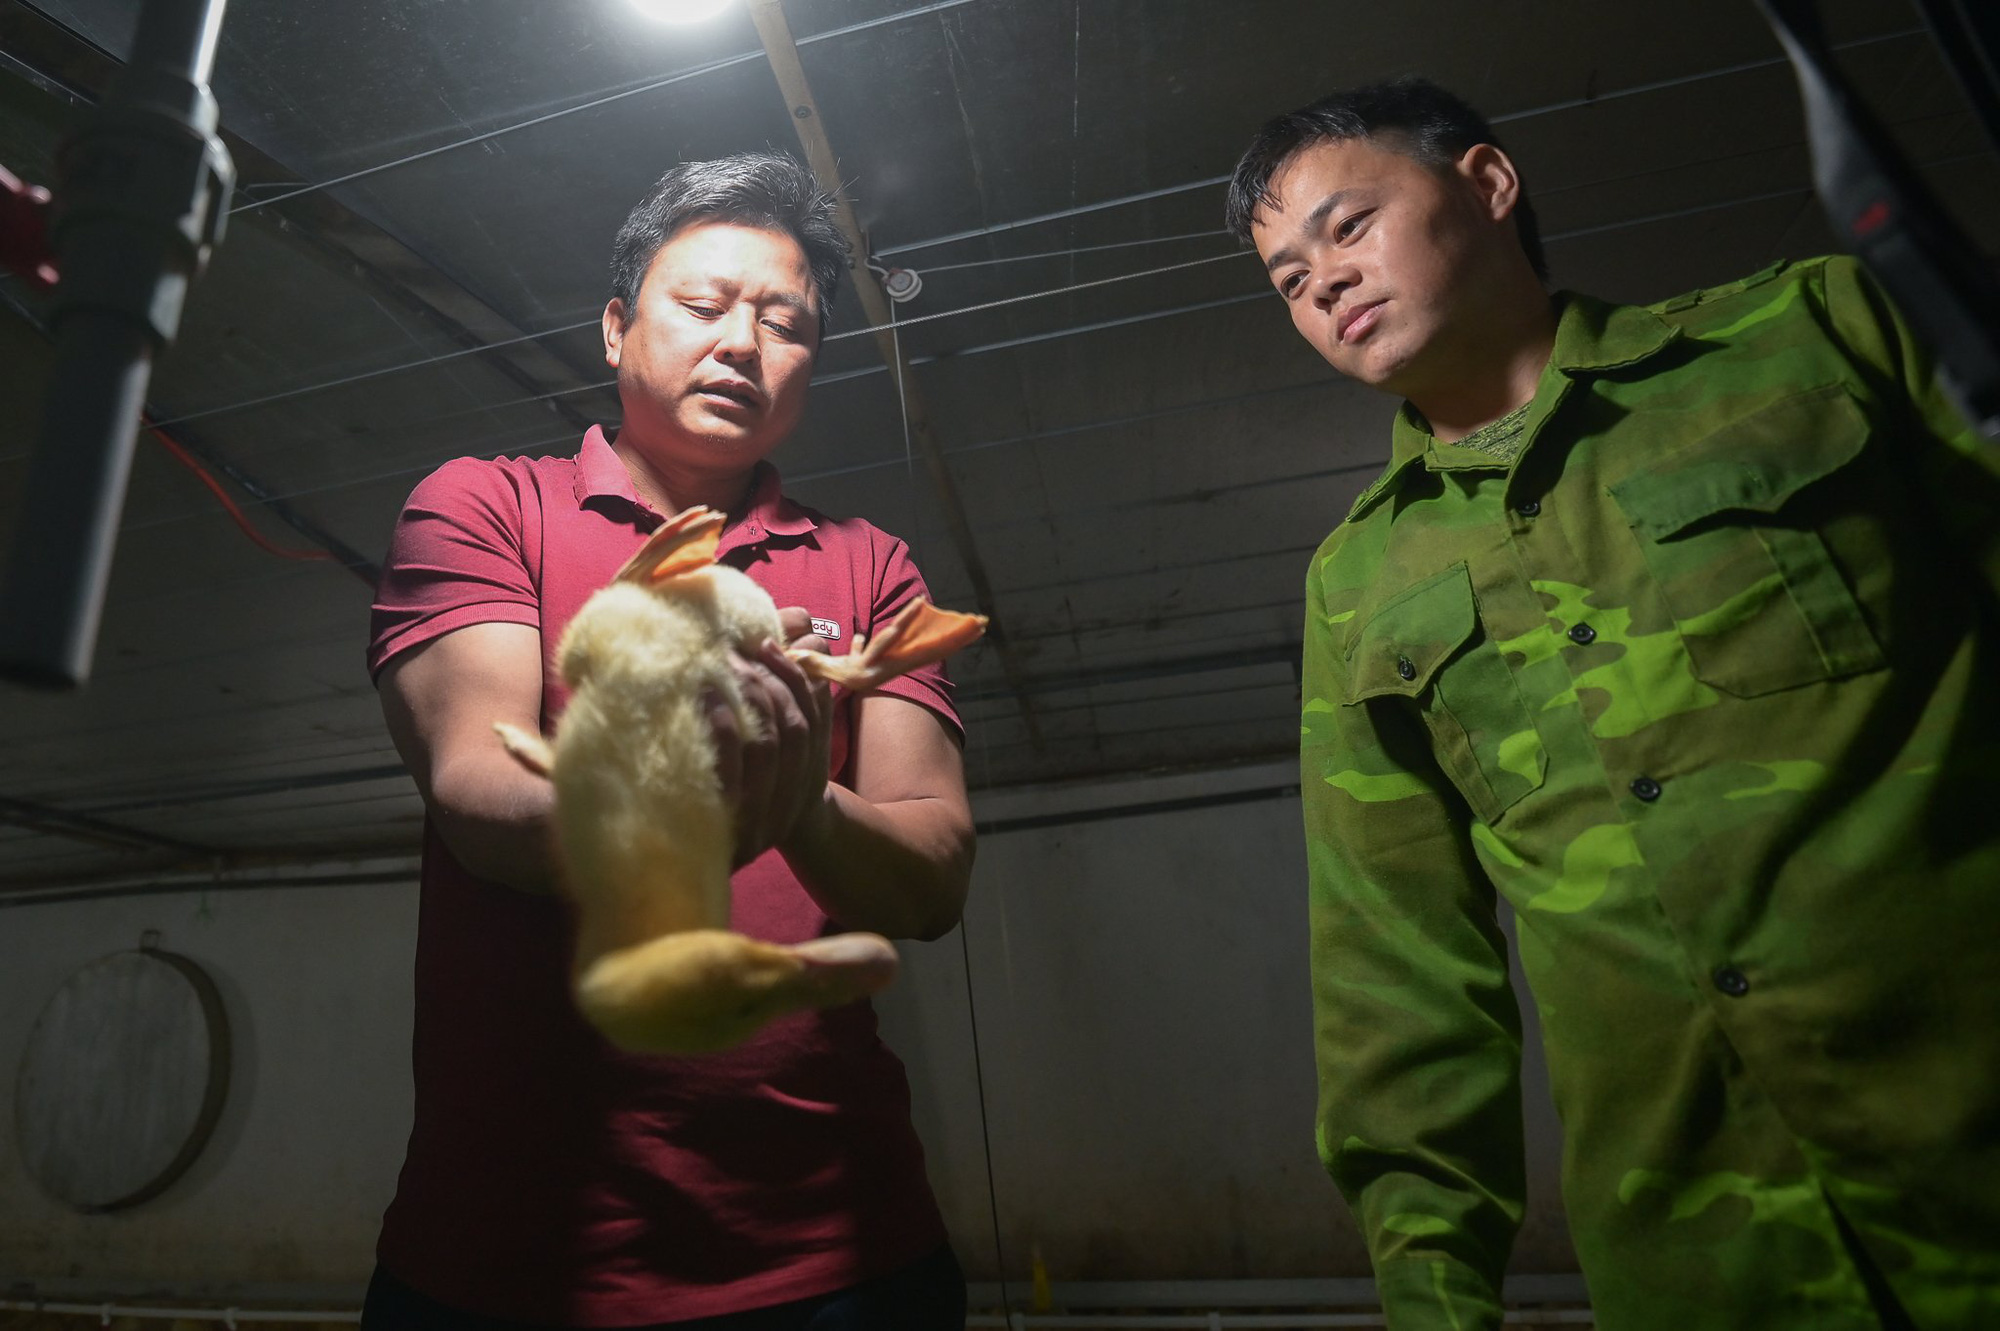 Le Xuan Nam (L) instructs a worker how to take care of ducks at his duck farm in Tu Lan Ward, Viet Yen Town, Bac Giang Province, northern Vietnam. Photo: Ha Quan / Tuoi Tre